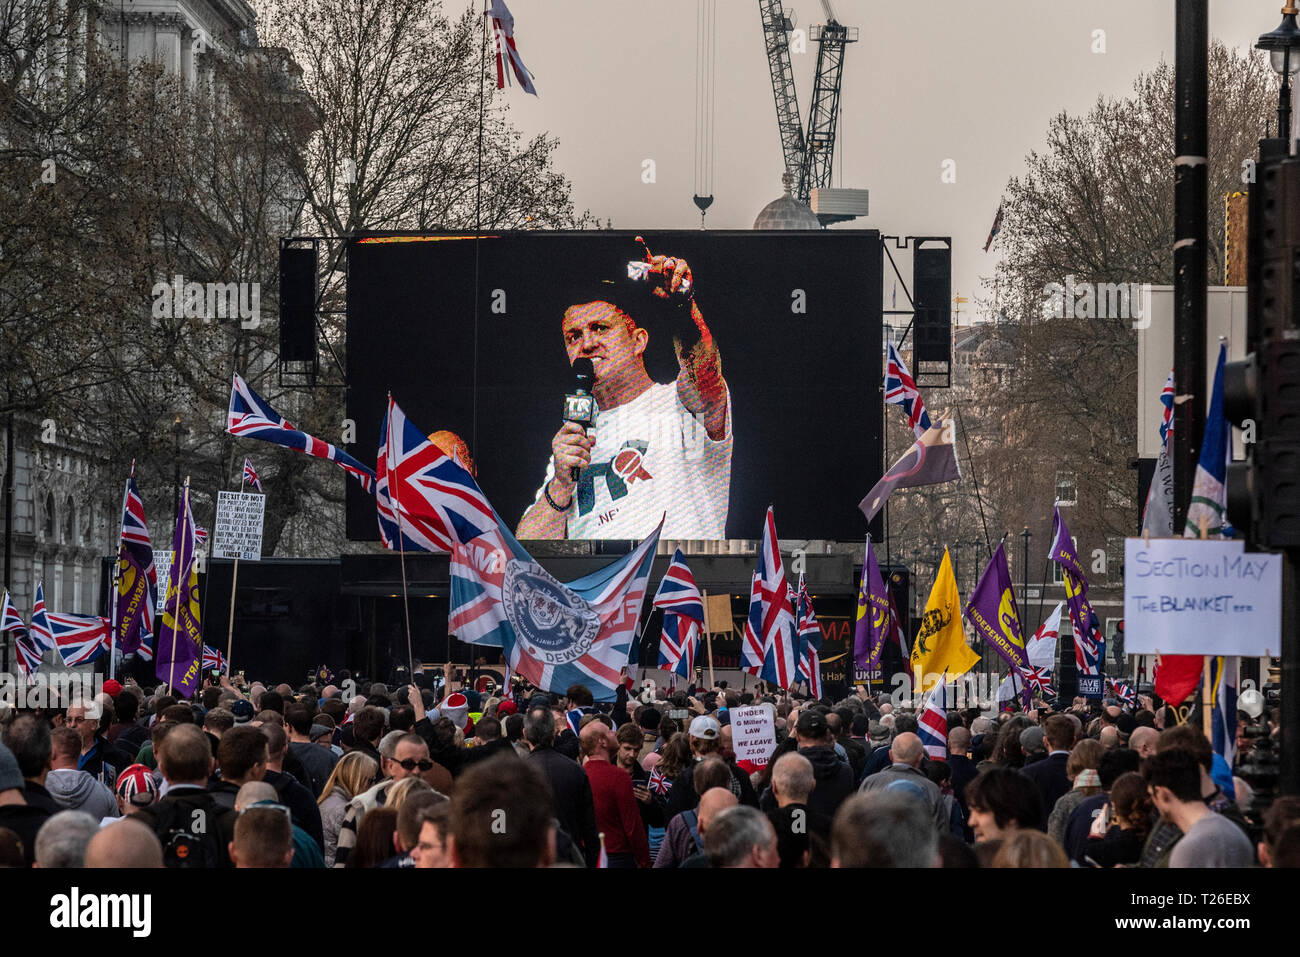 tommy-robinson-speaking-on-stage-at-the-brexit-betrayal-protest-rally-in-whitehall-westminster-london-uk-with-crowd-and-union-jack-flags-T26EBX.jpg